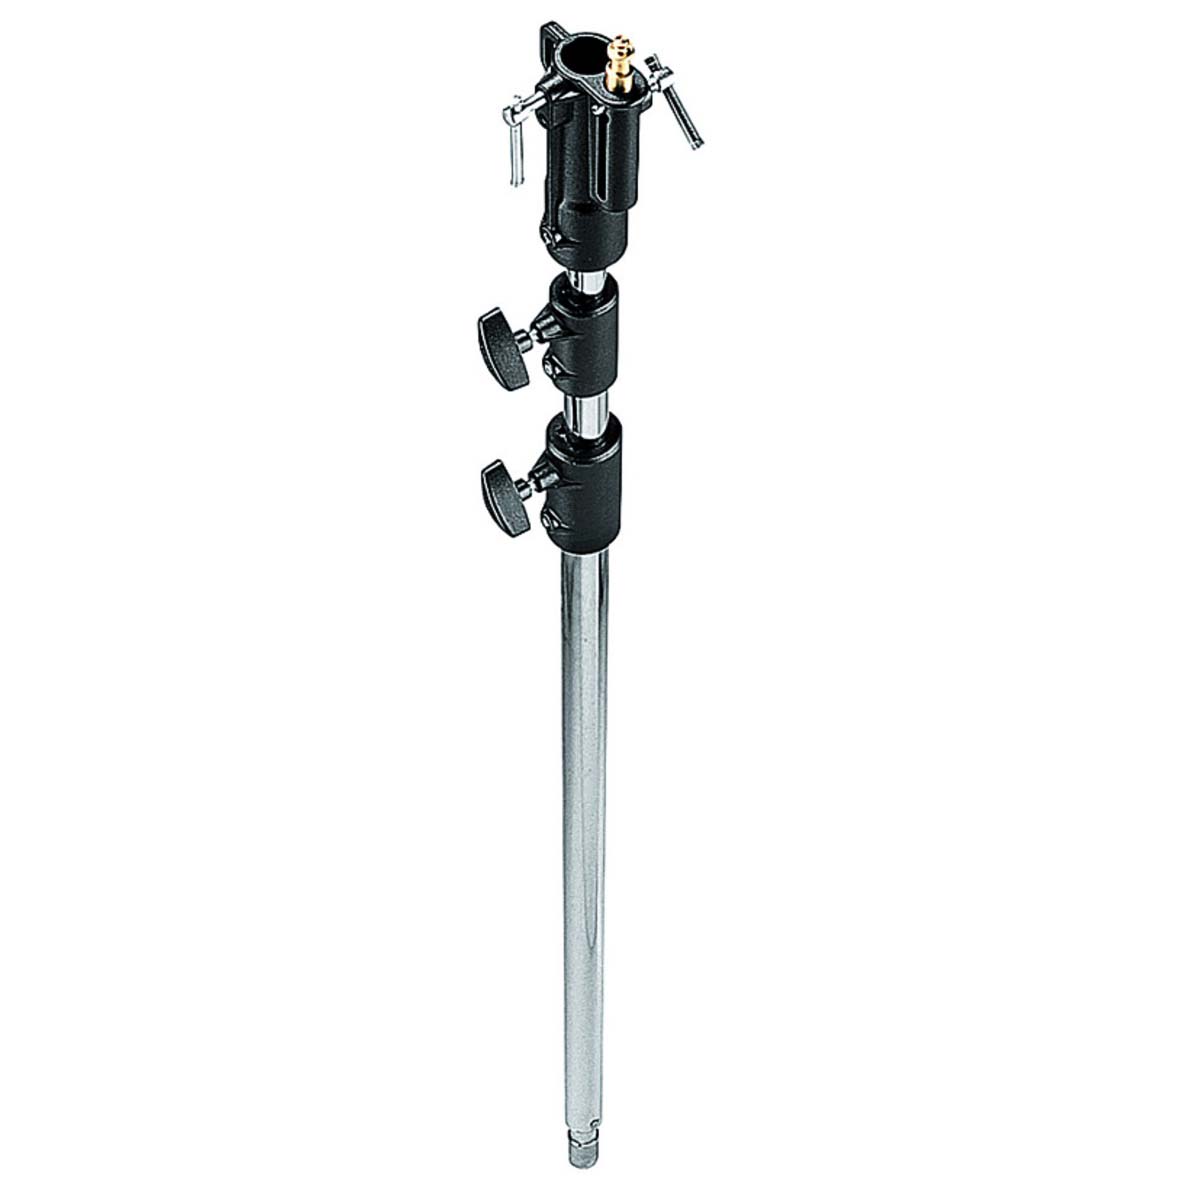 EXTENSION MANFROTTO 146CS MANFROTTO 